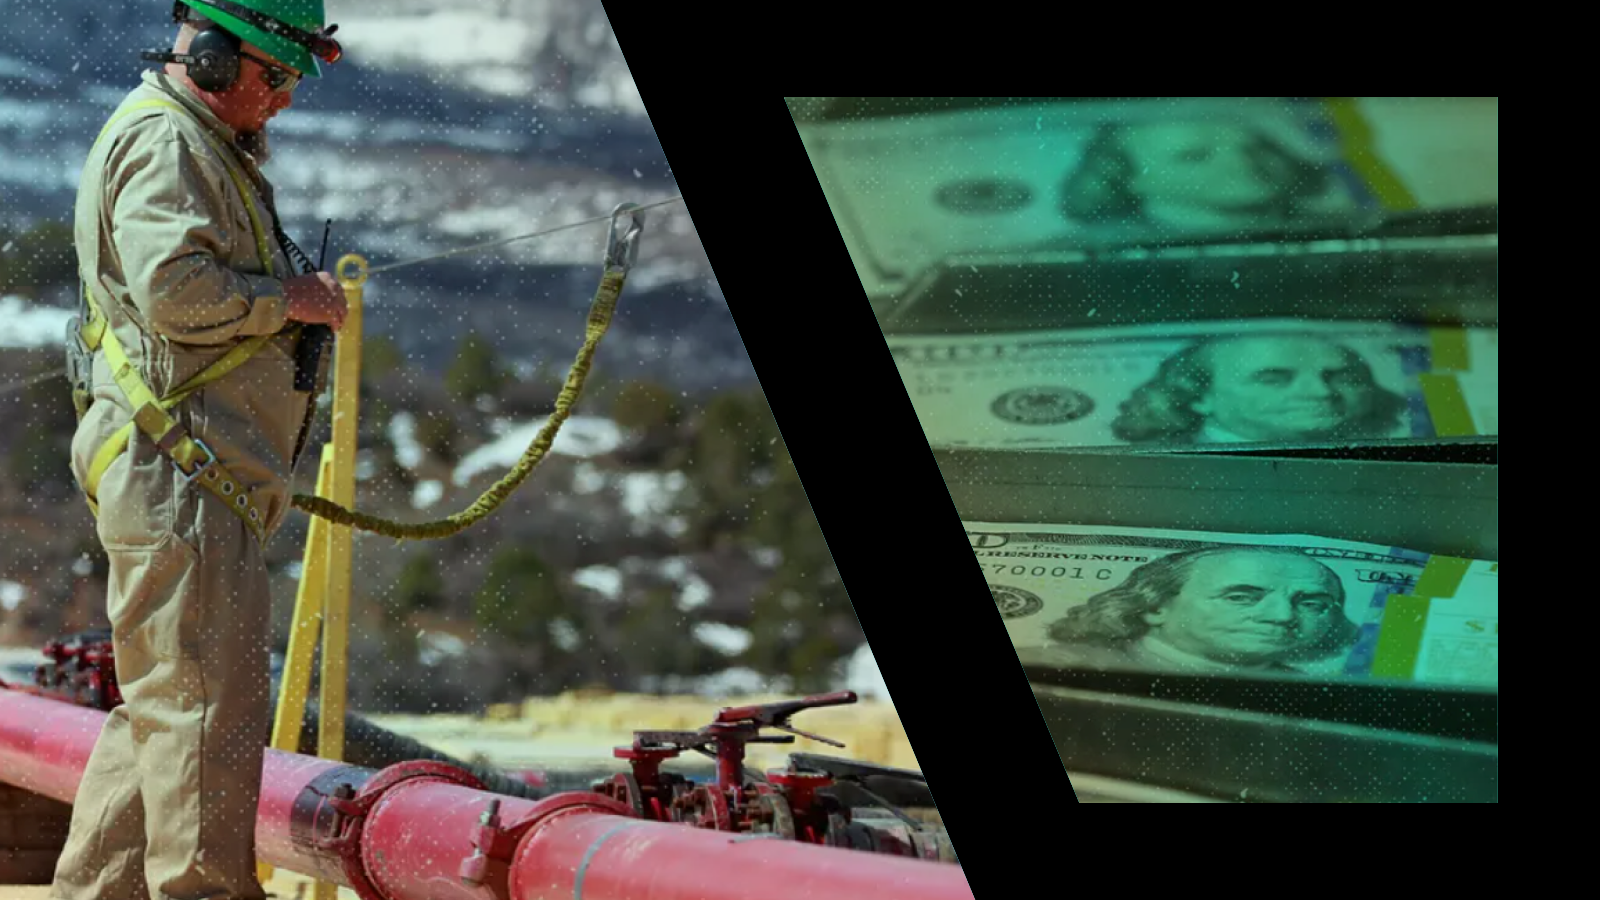 On the right we see a pipeline worker at work, on the right we see stacks of money after printing.